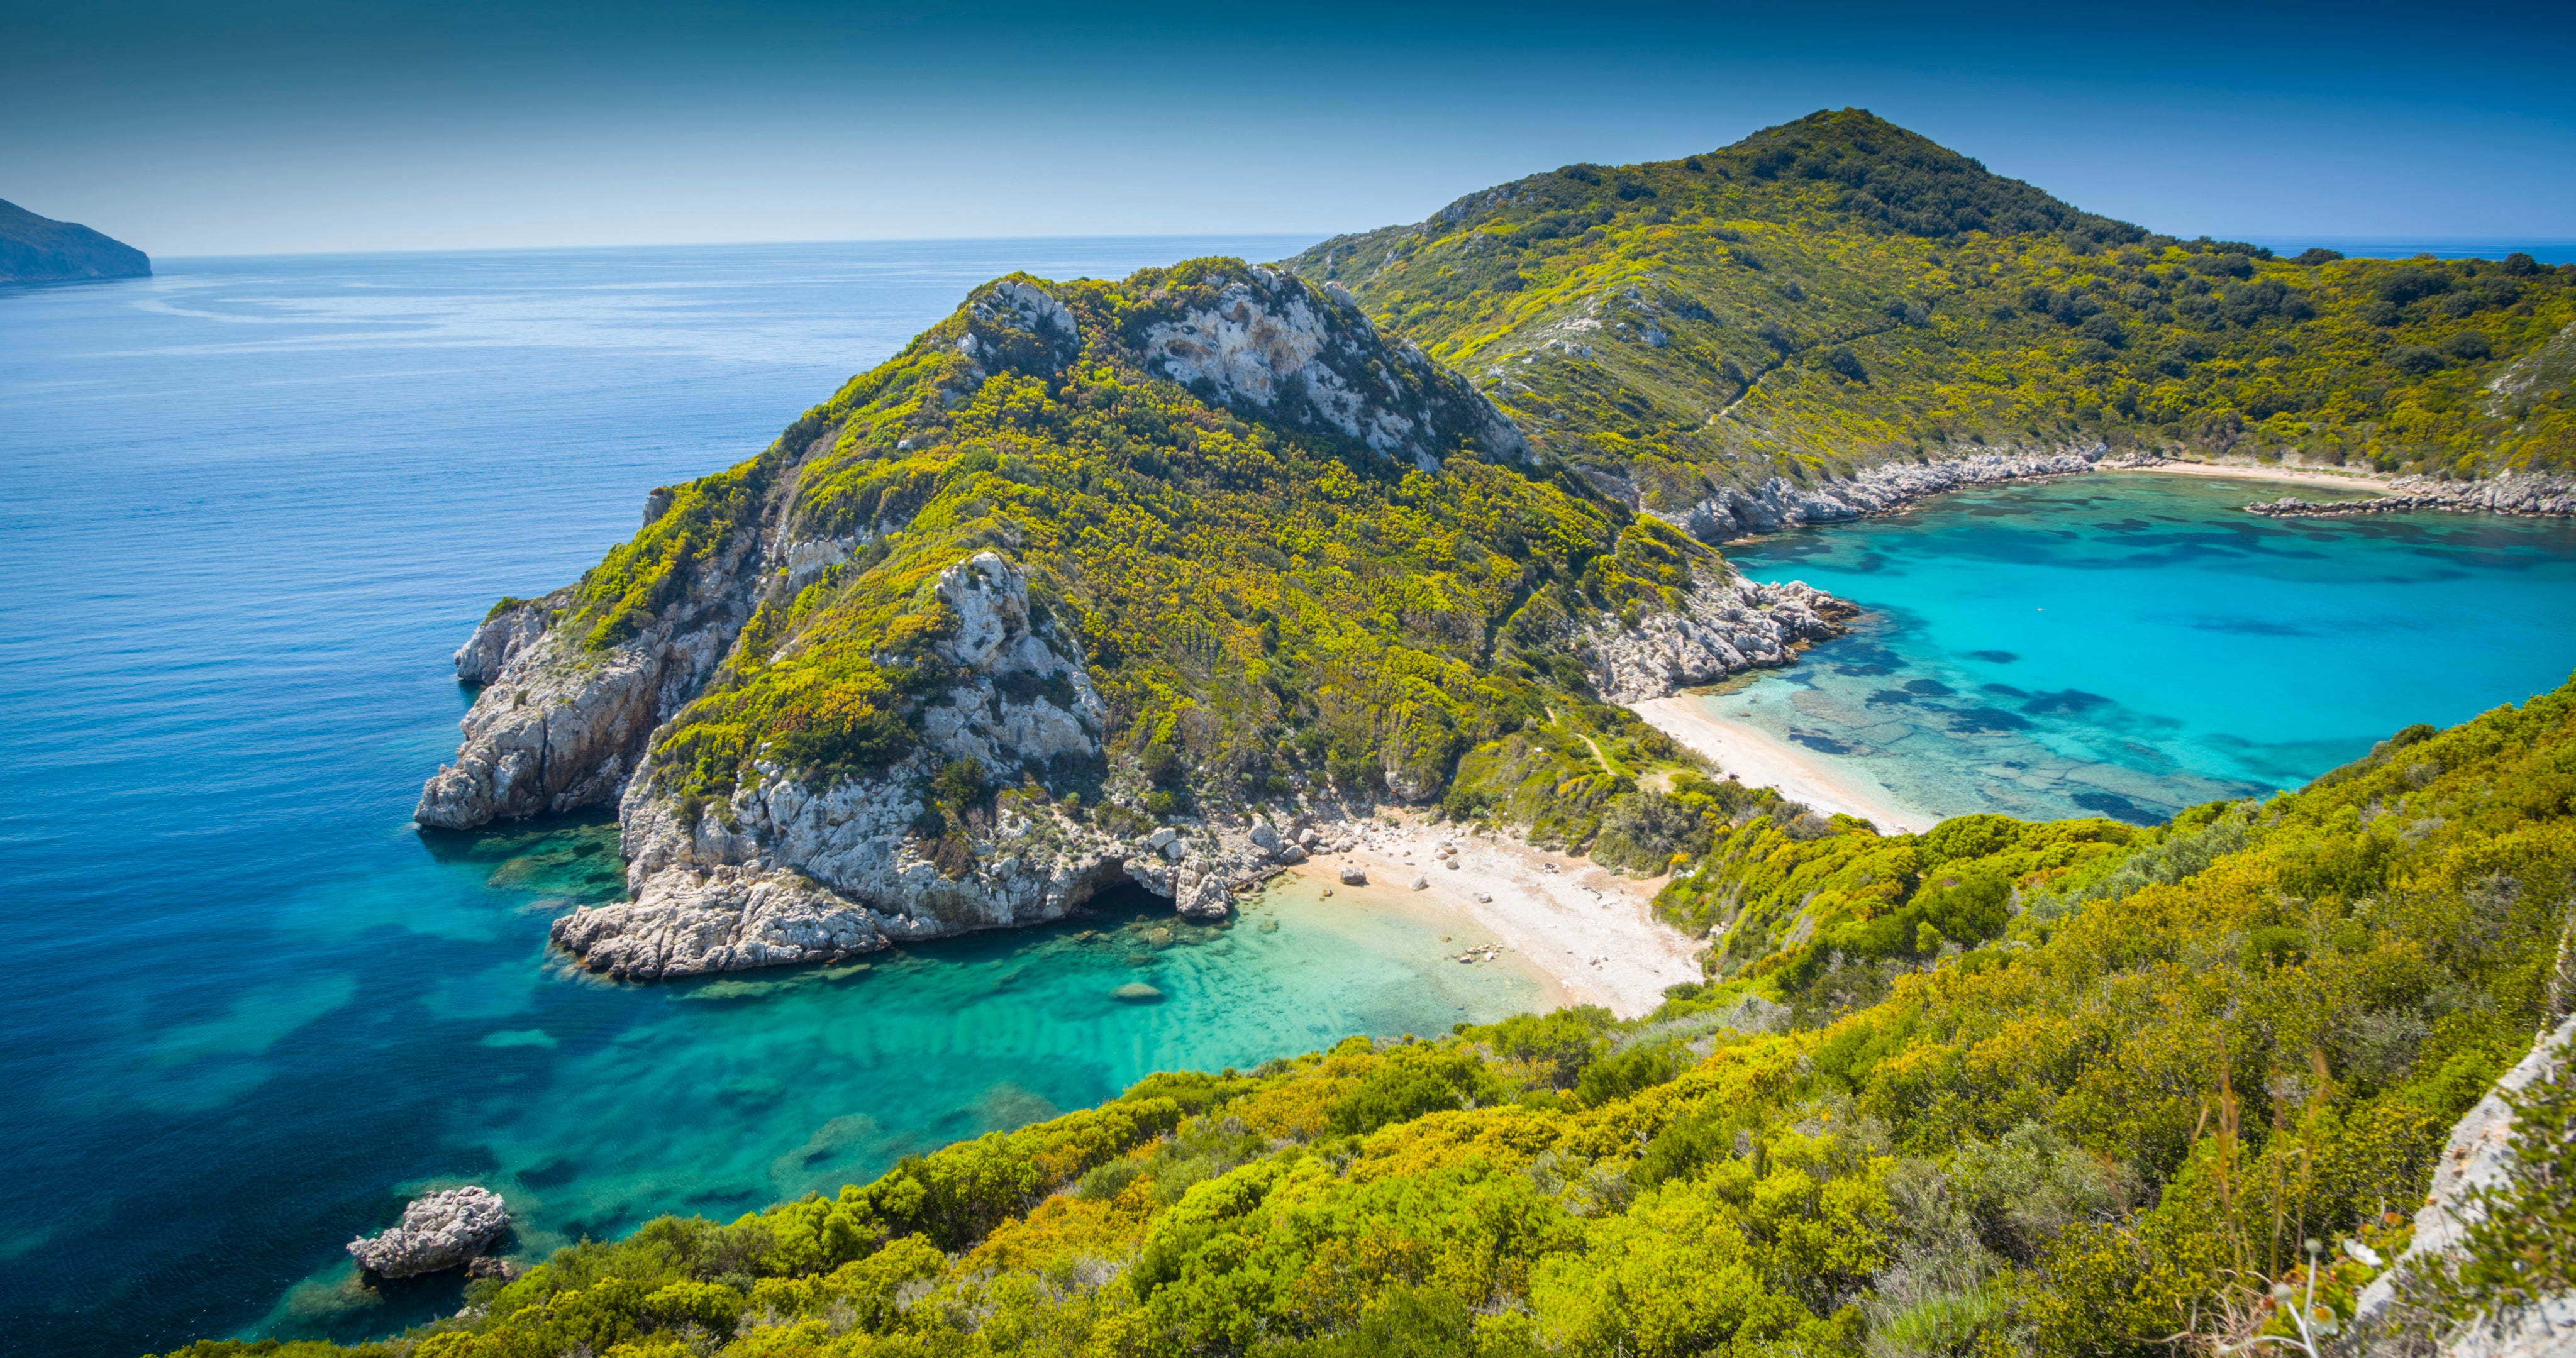 Losing 10 hours of time spent in Corfu is ‘absolutely shocking’